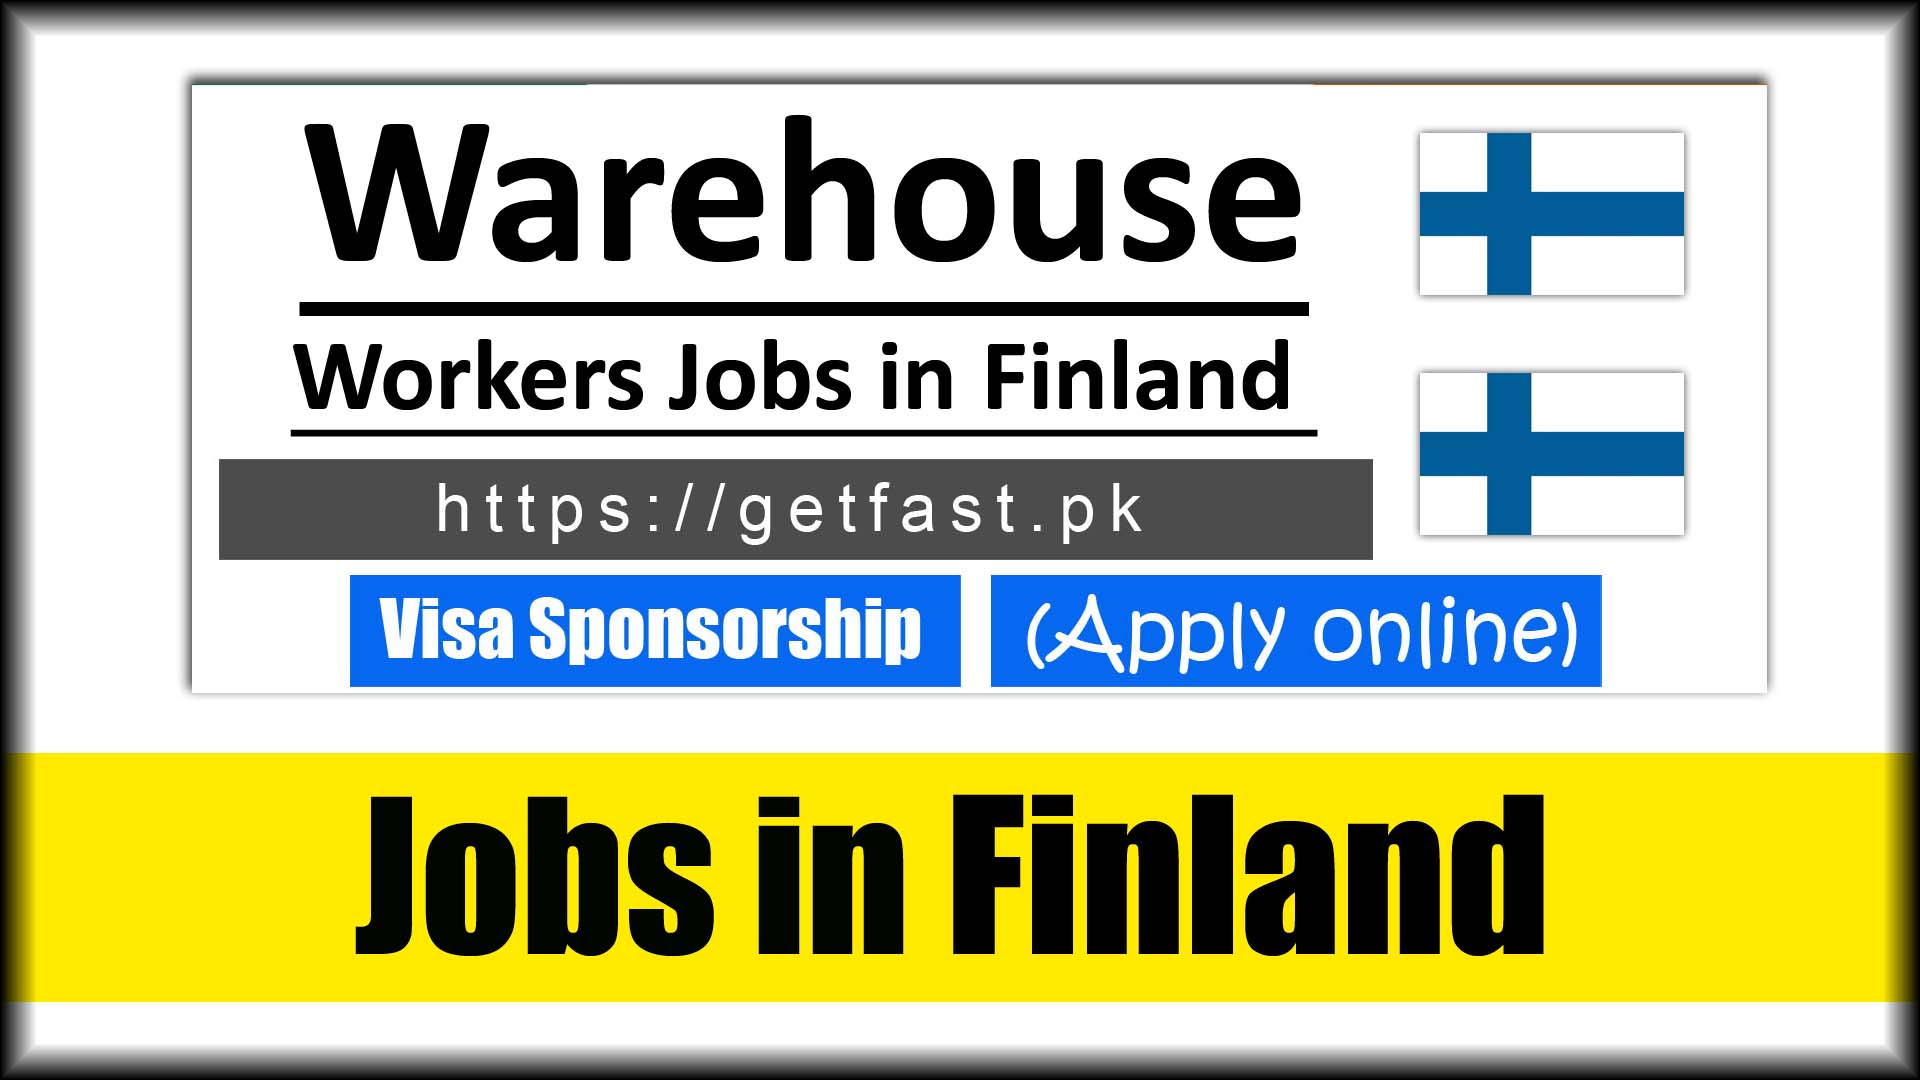 Jobs in Finland